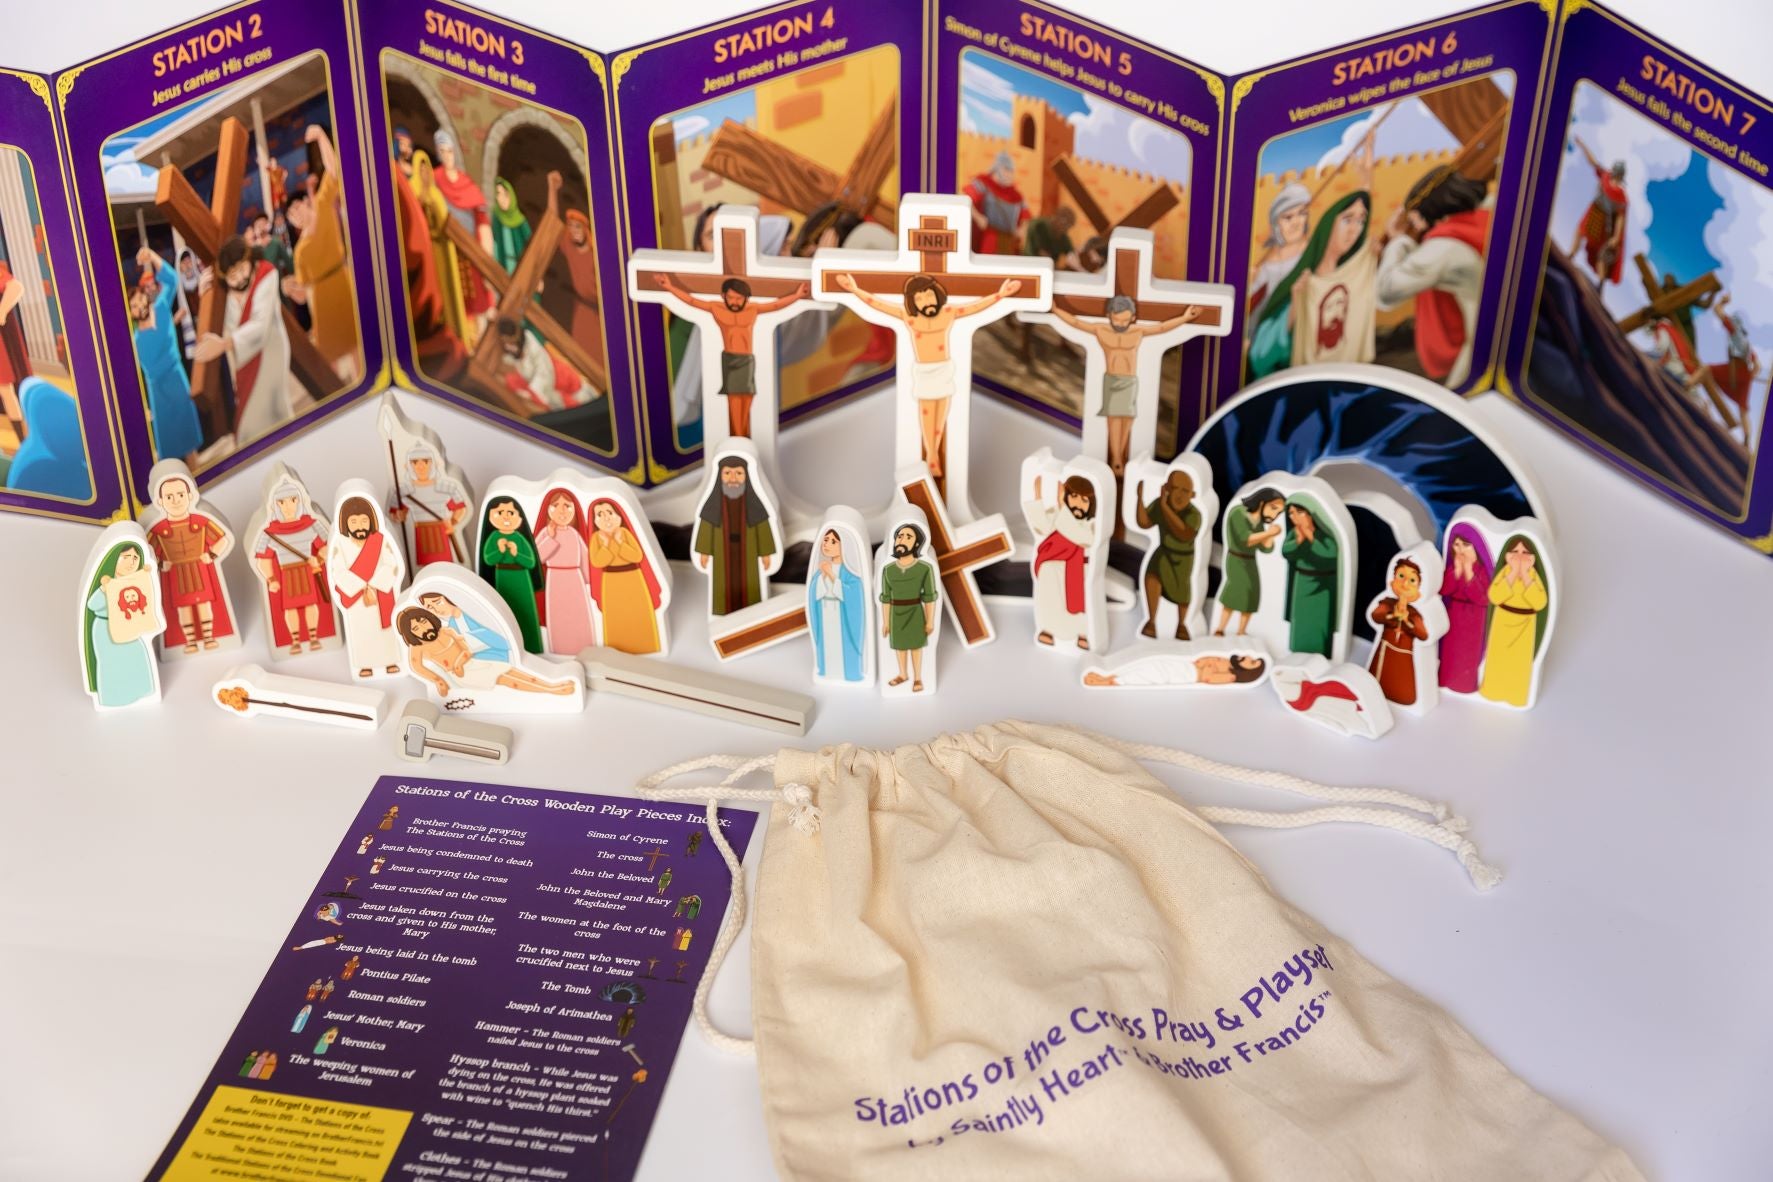 Stations of the Cross Pray & Play Set - By Saintly Heart & Brother Francis